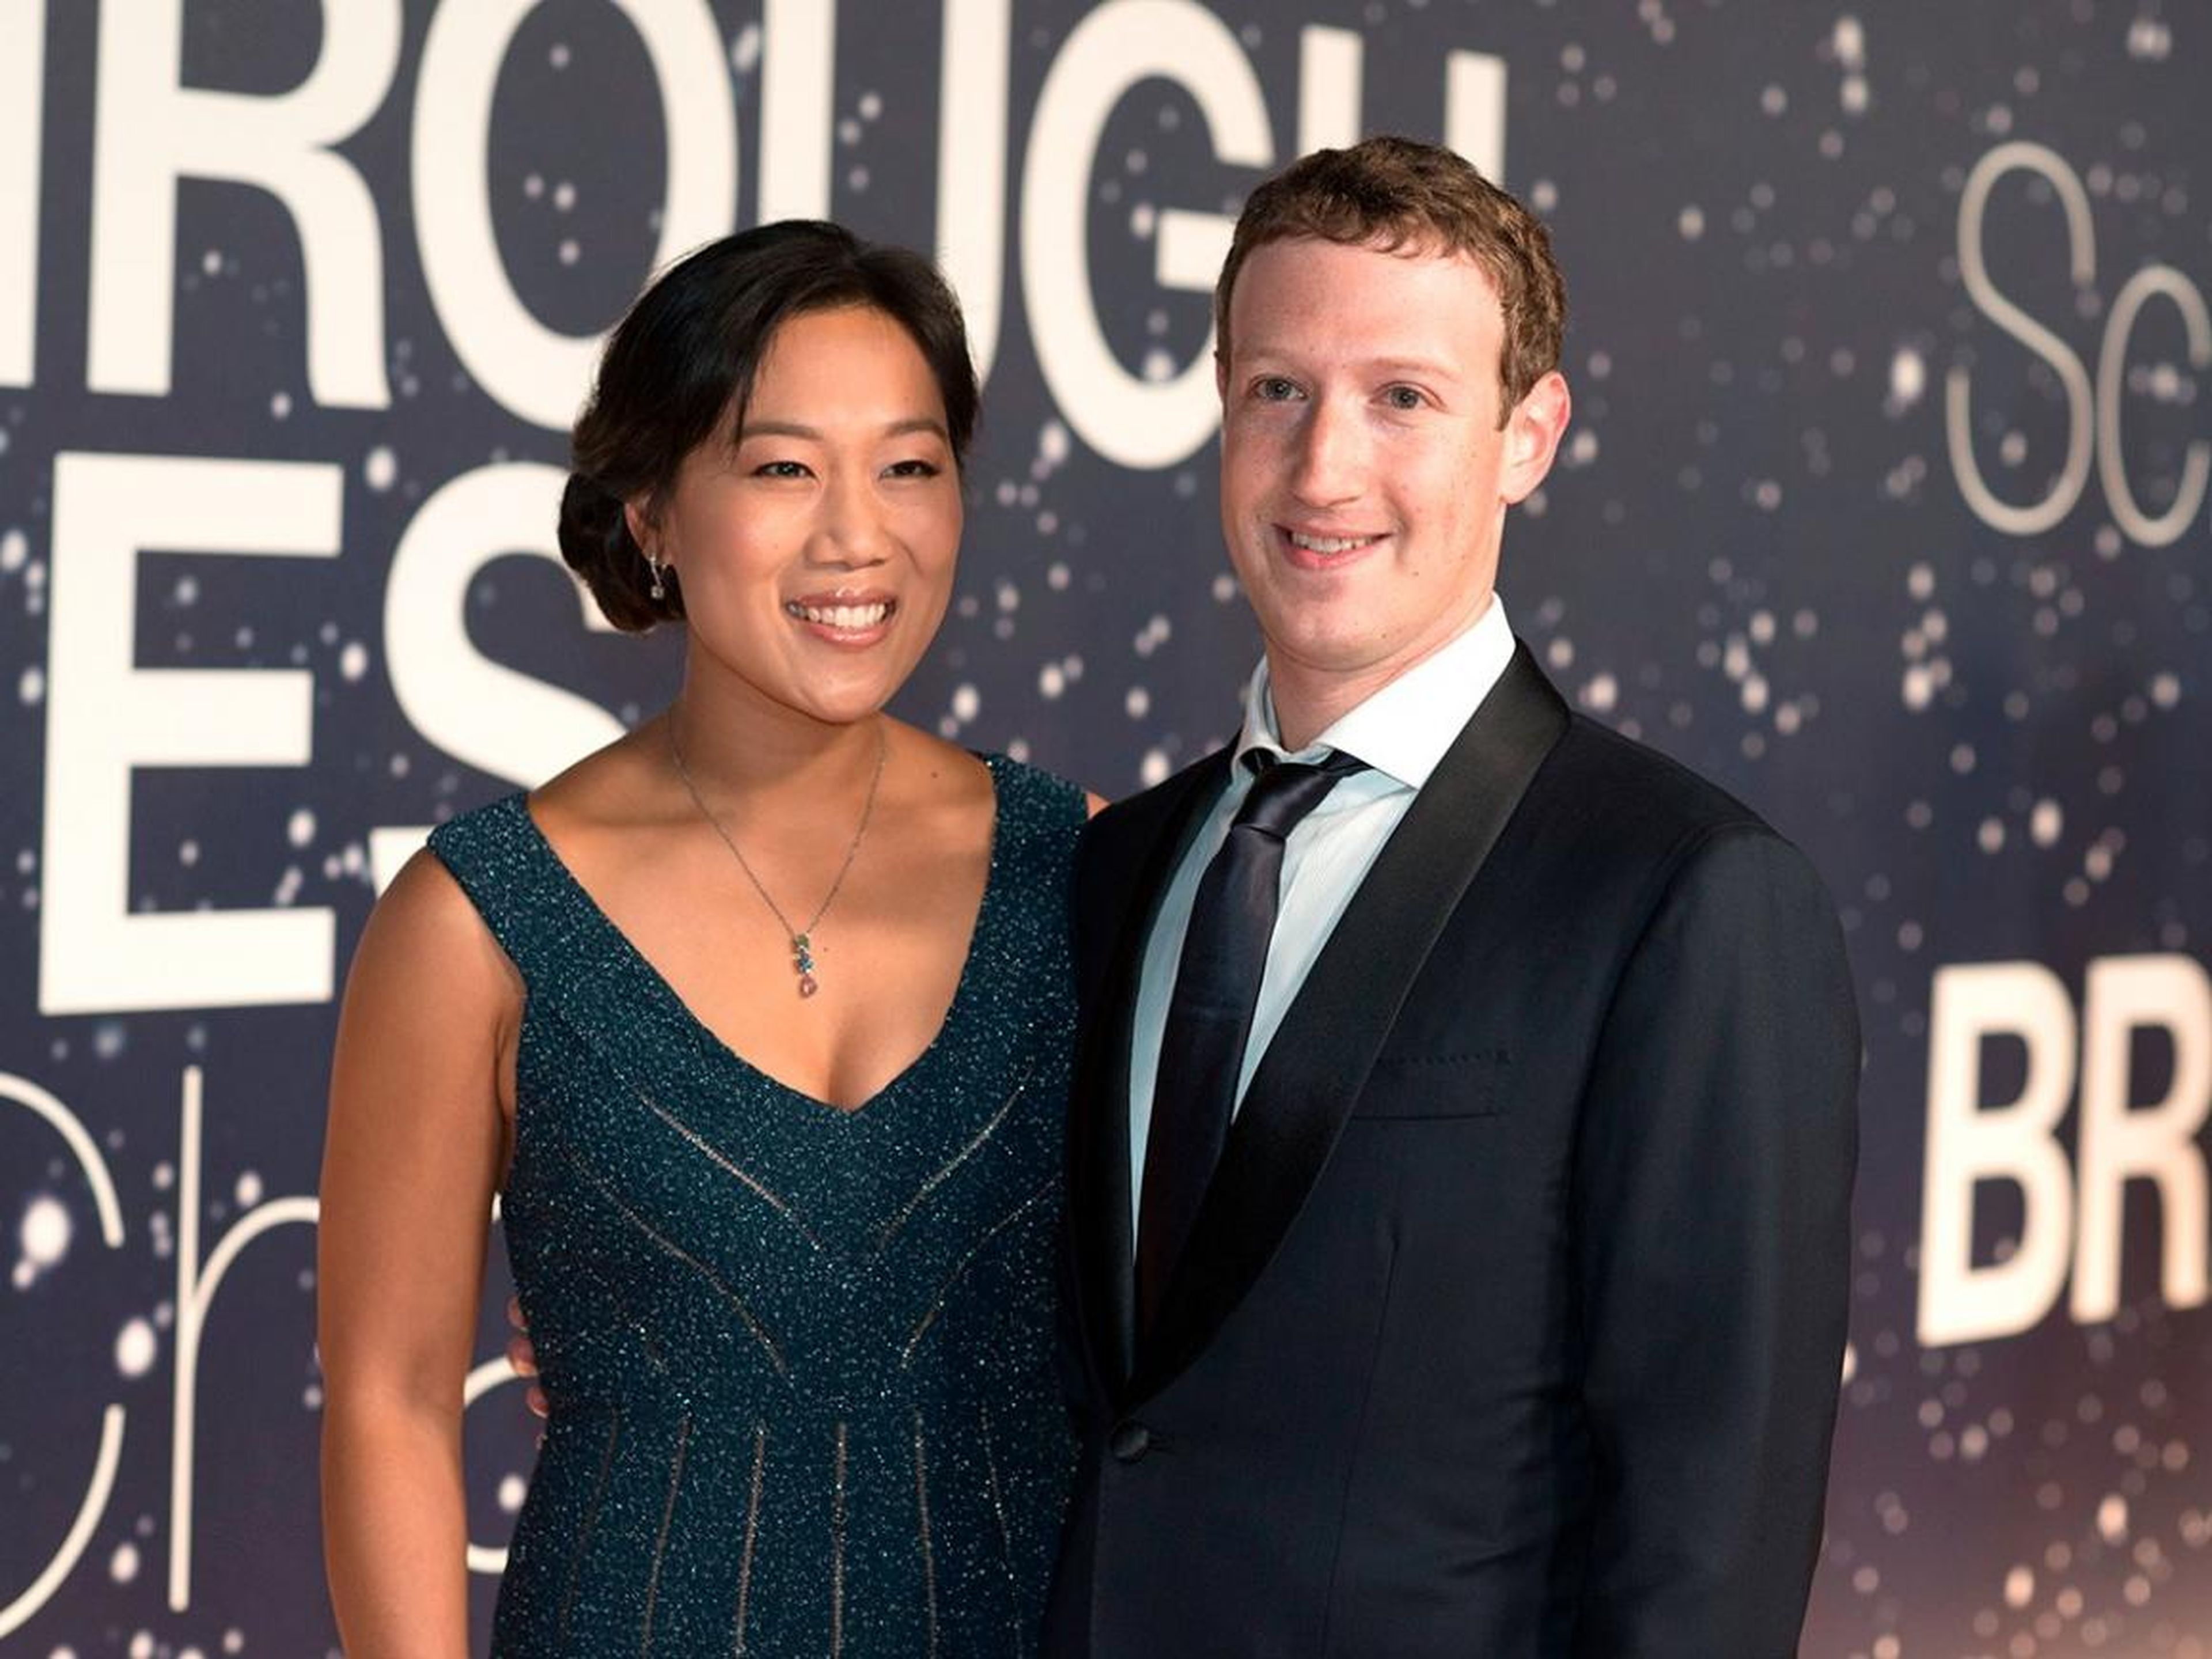 A new phase of Zuckerberg's career began in 2015 when he and his wife Priscilla Chan launched the Chan Zuckerberg Initiative. The couple pledged to give 99% of the value of their Facebook shares to the philanthropic venture to